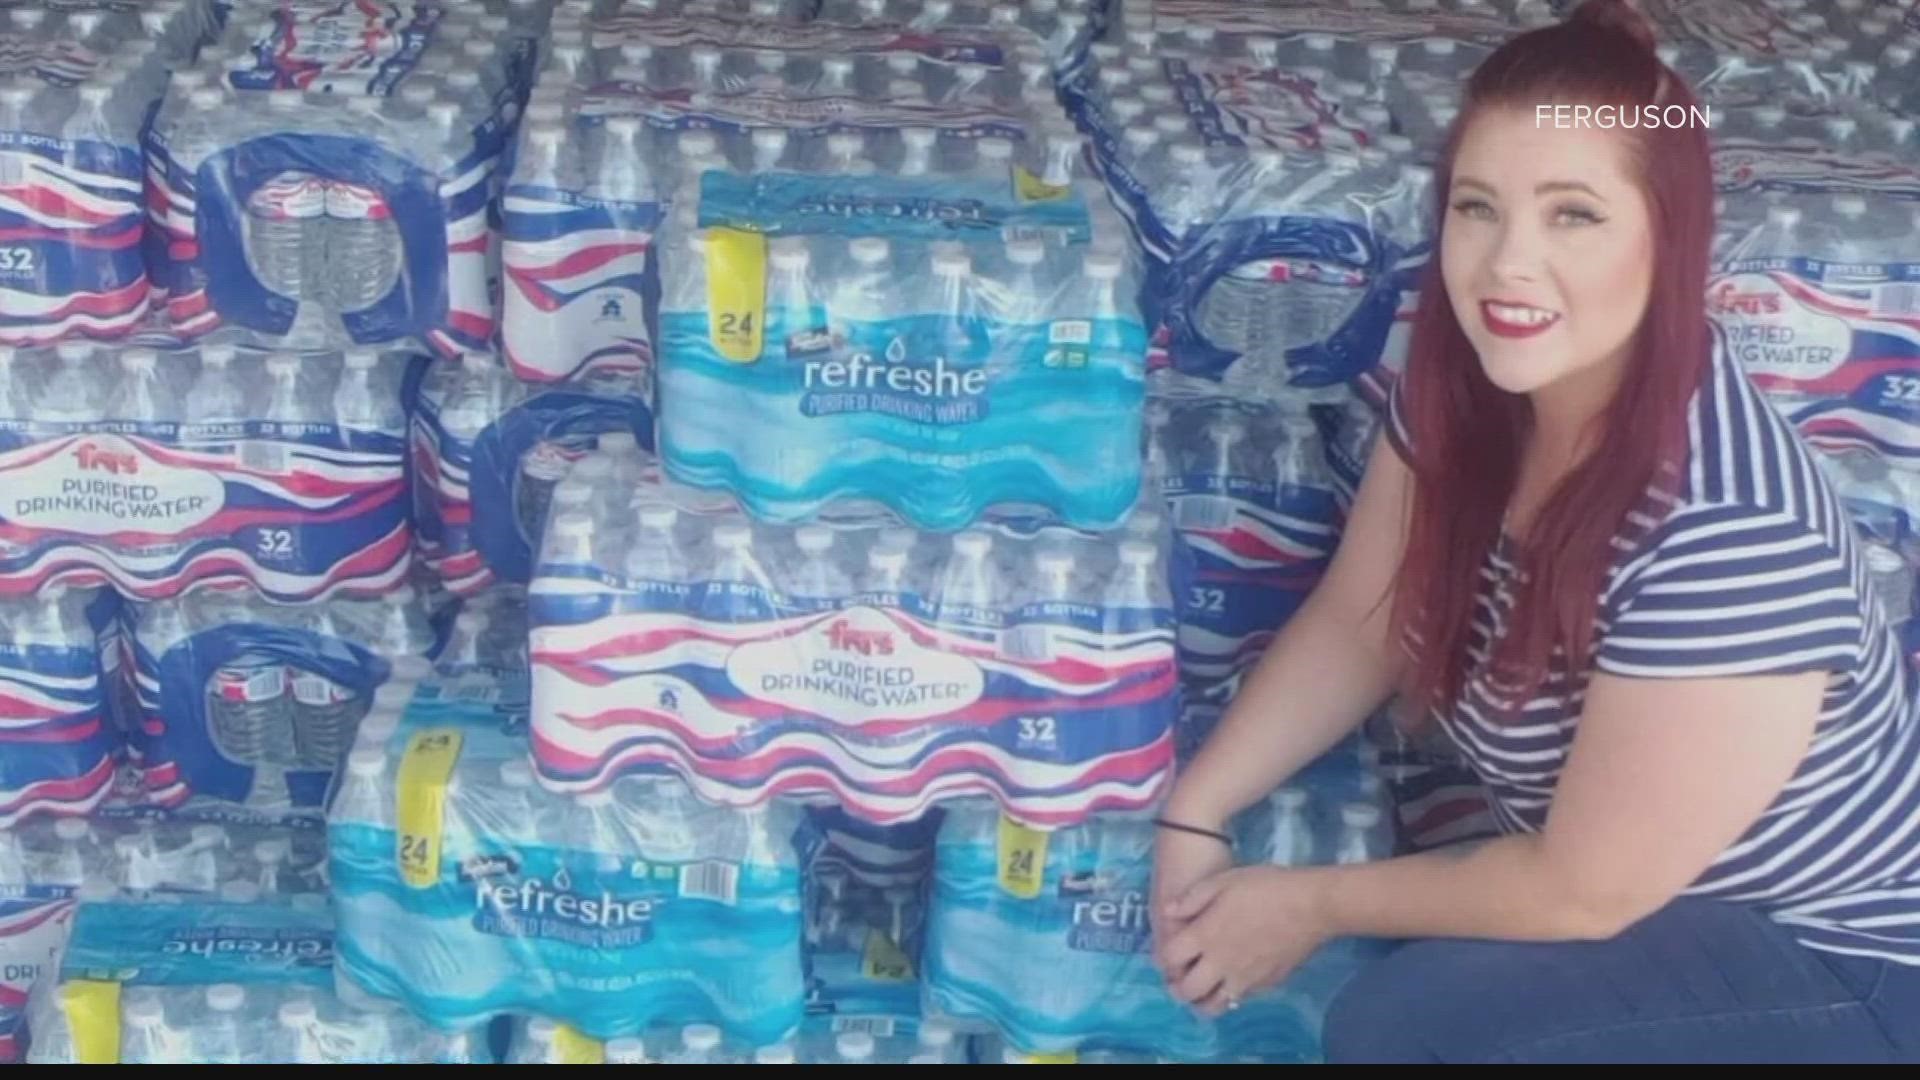 Annual water drive "Bottles for Bill" hopes to help those in need during summer months. Jen Wahl has more on the program.